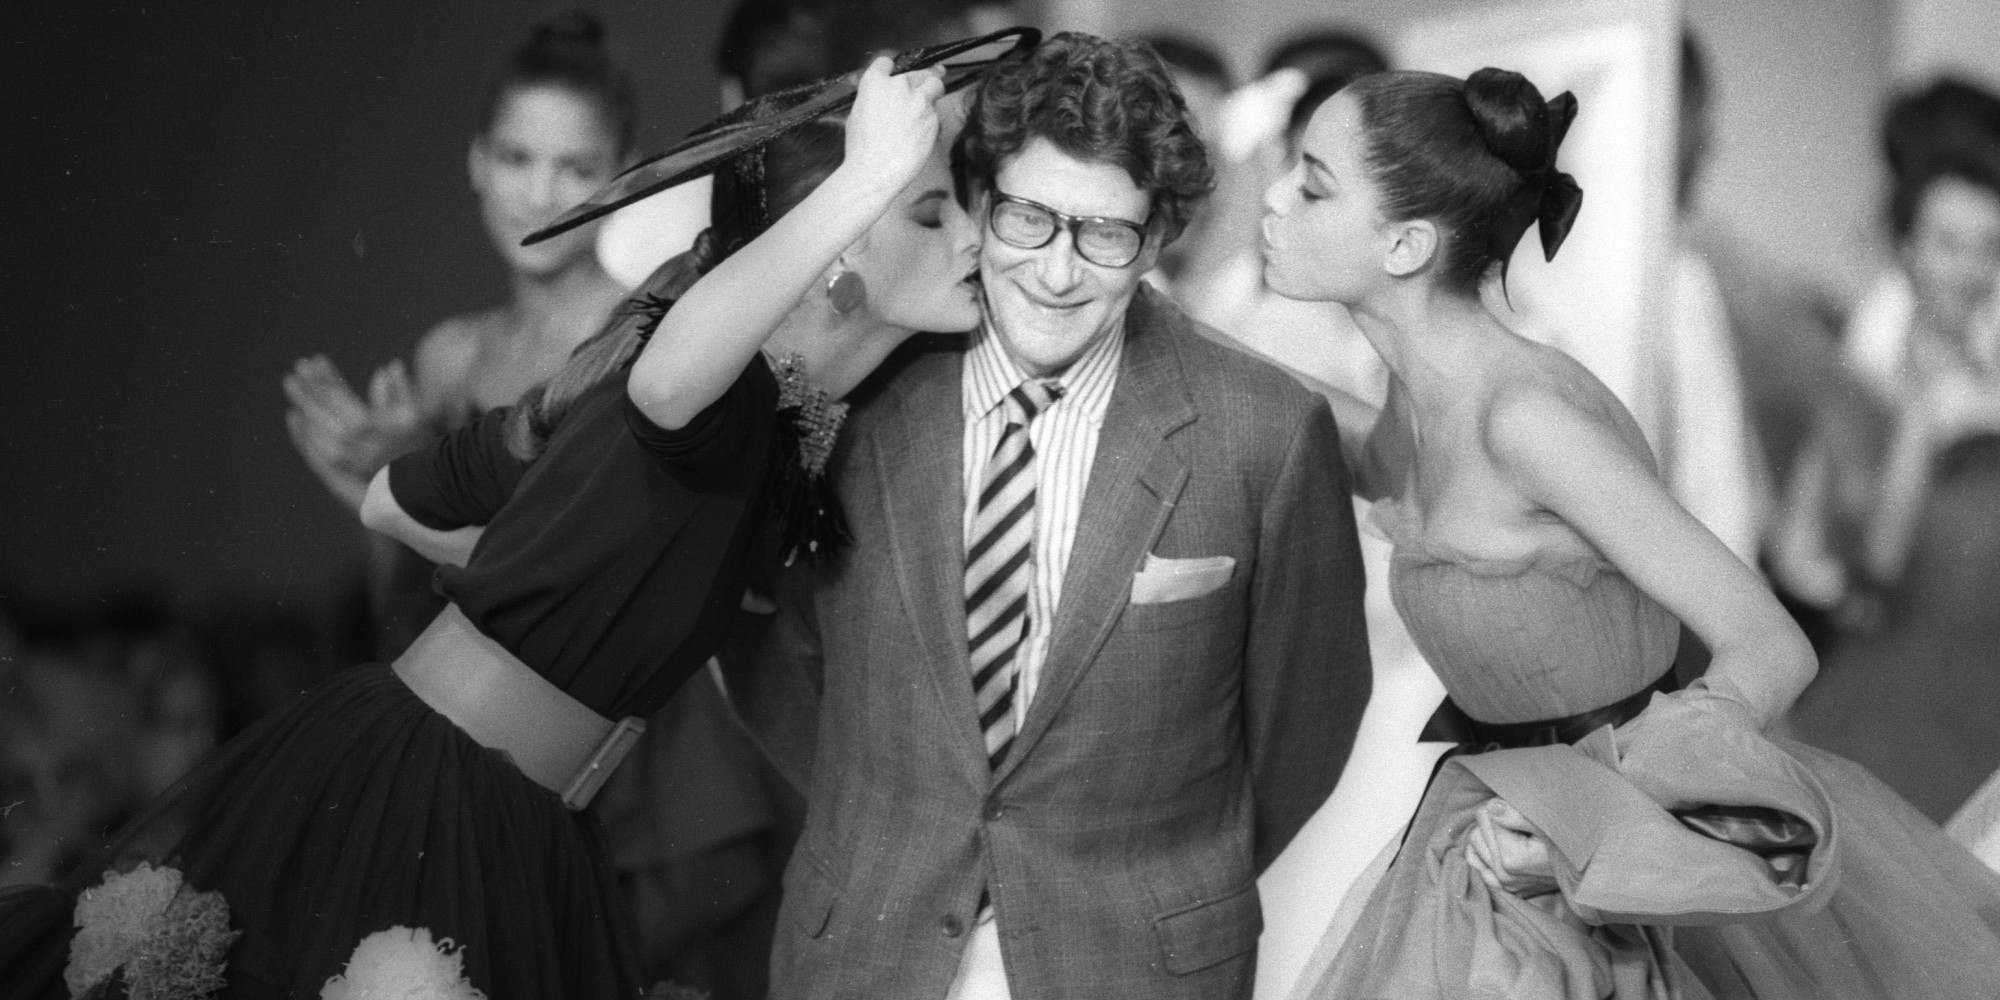 French designer Yves Saint Laurent is kissed by models at the end of his fashion show in Paris October 21, 1987. REUTERS/Luc Novovitch (FRANCE) BEST QUALITY AVAILABLE - RTR21B68